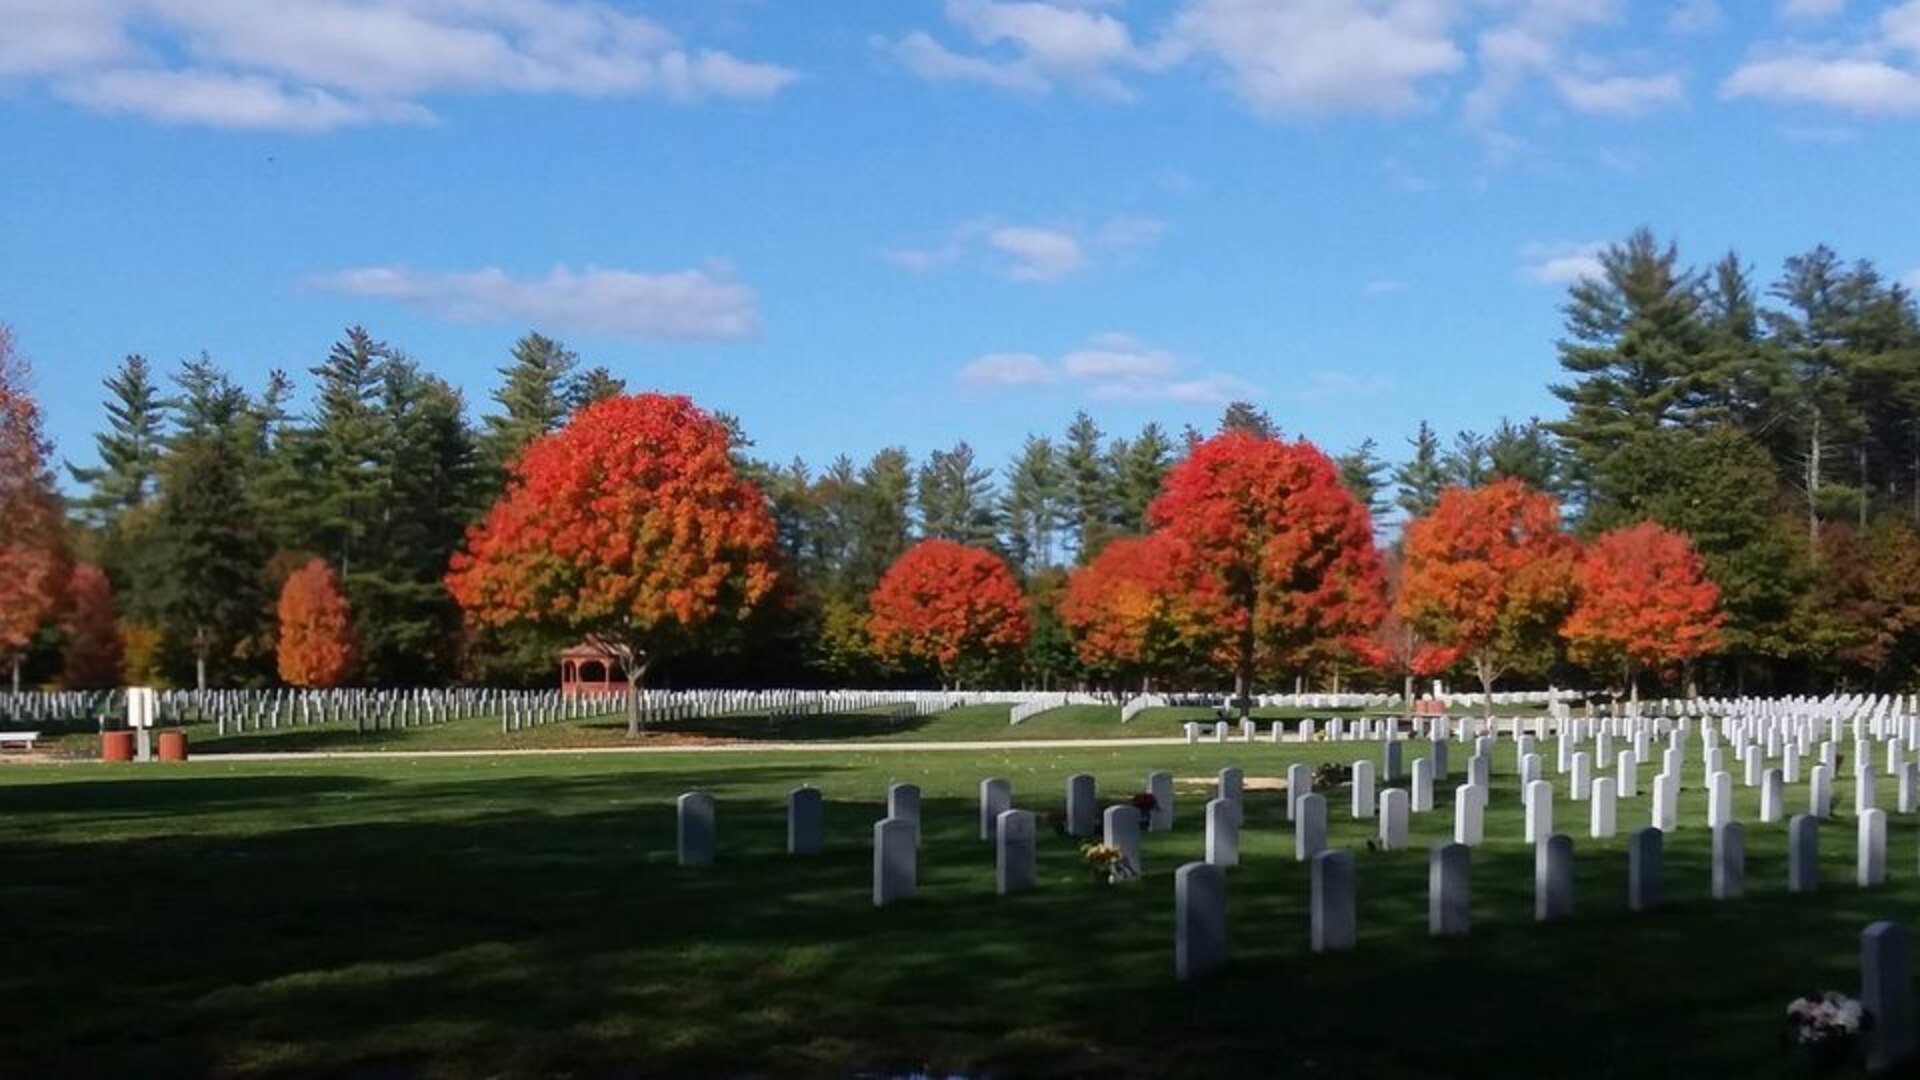 NH Veterans Cemetery will conduct a Veterans Day ceremony that's closed to the public. It can be viewed remotely from their official Facebook page.